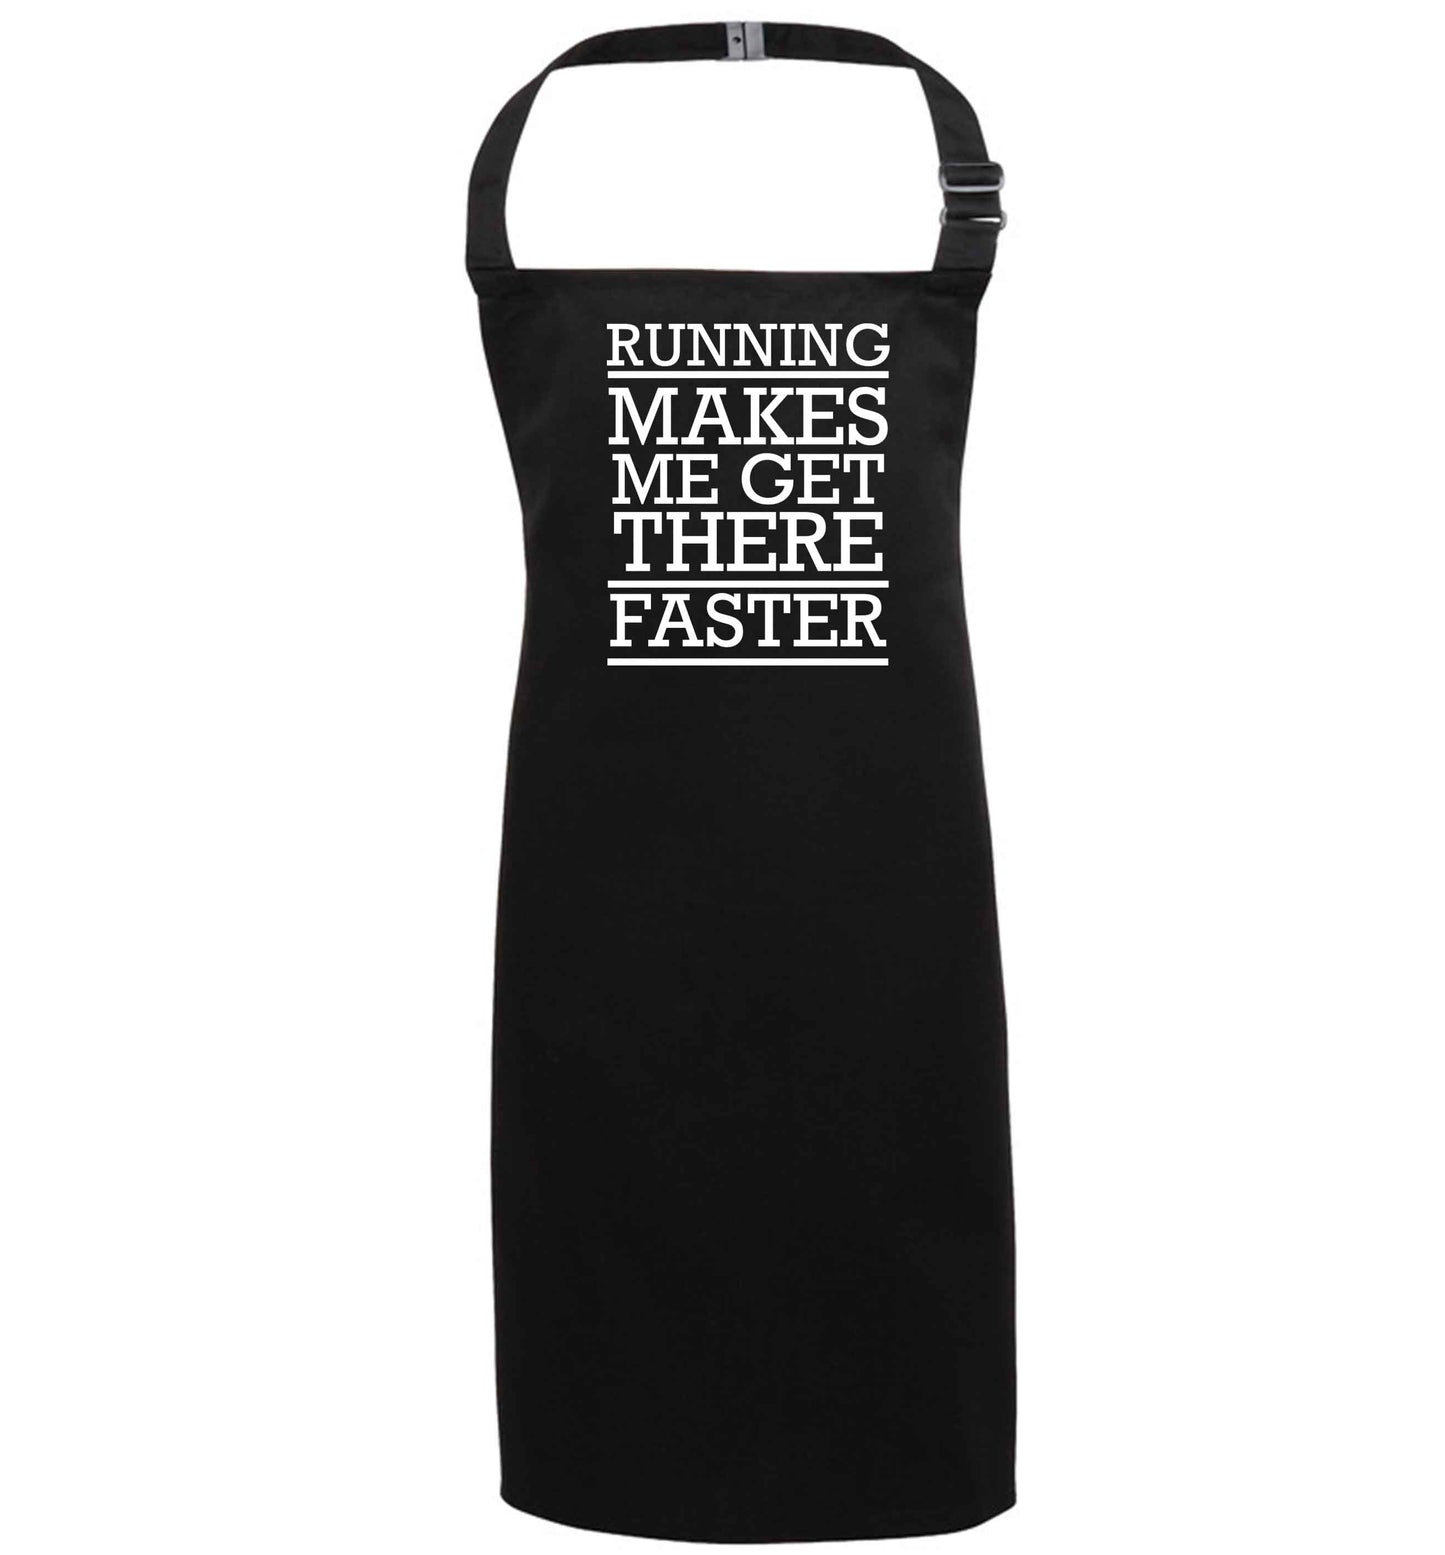 Running makes me get there faster black apron 7-10 years